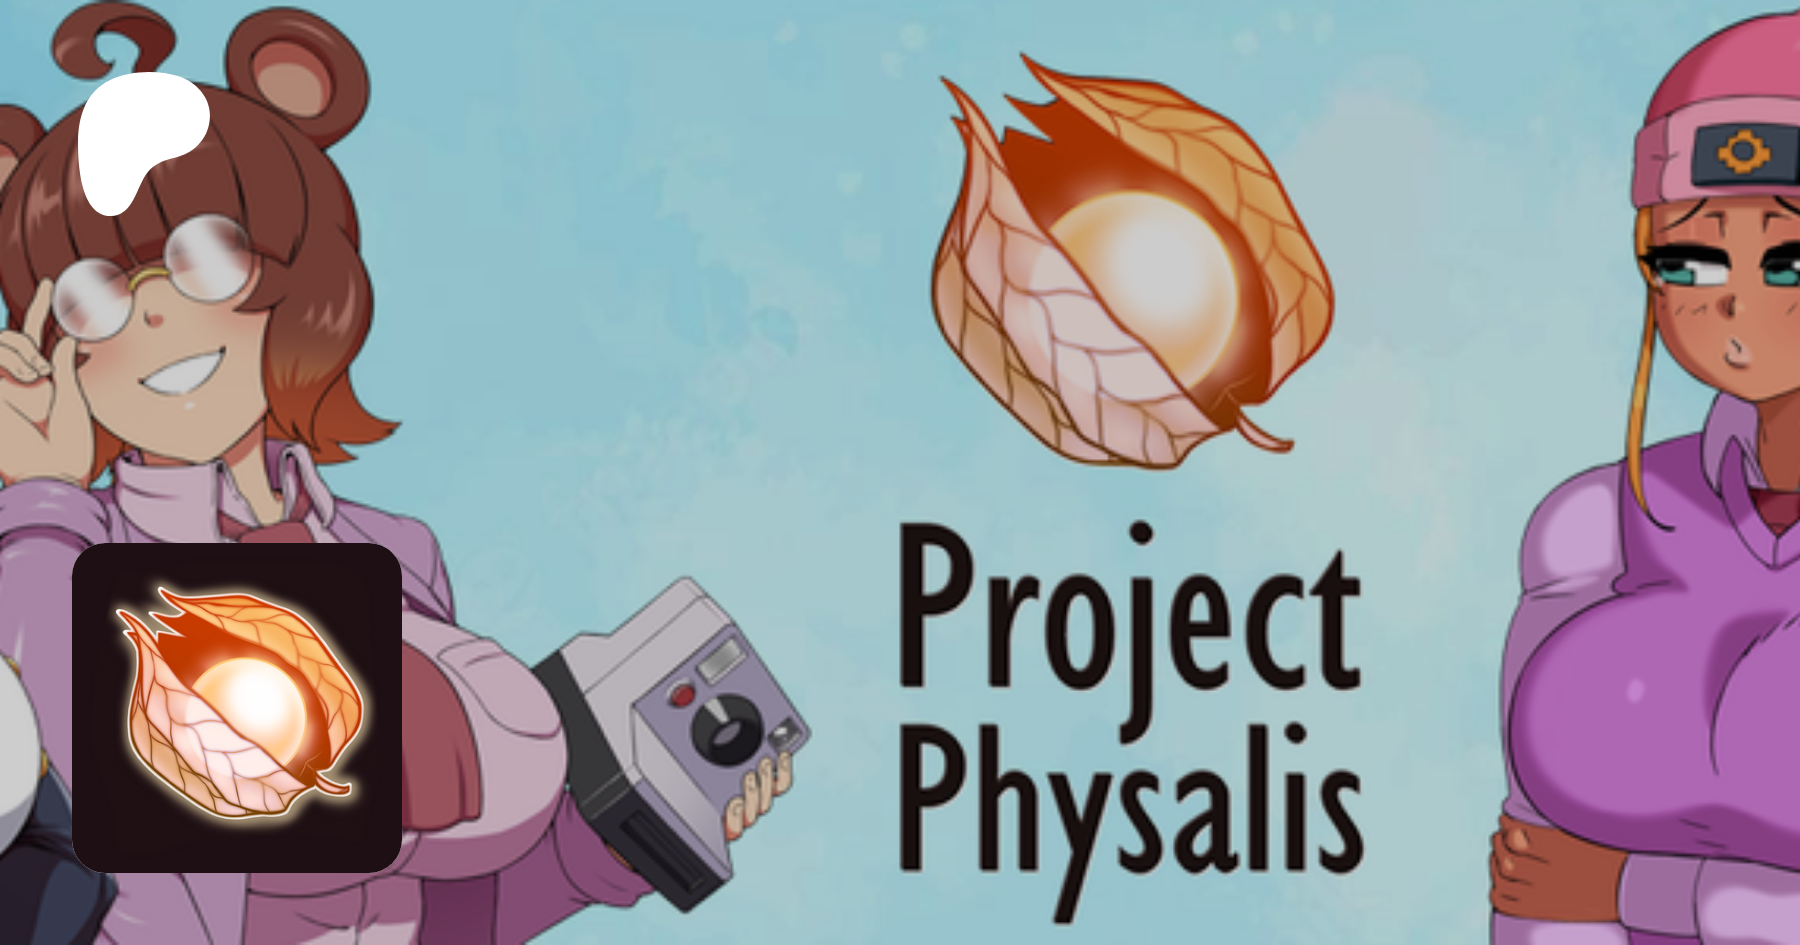 Project phylasis